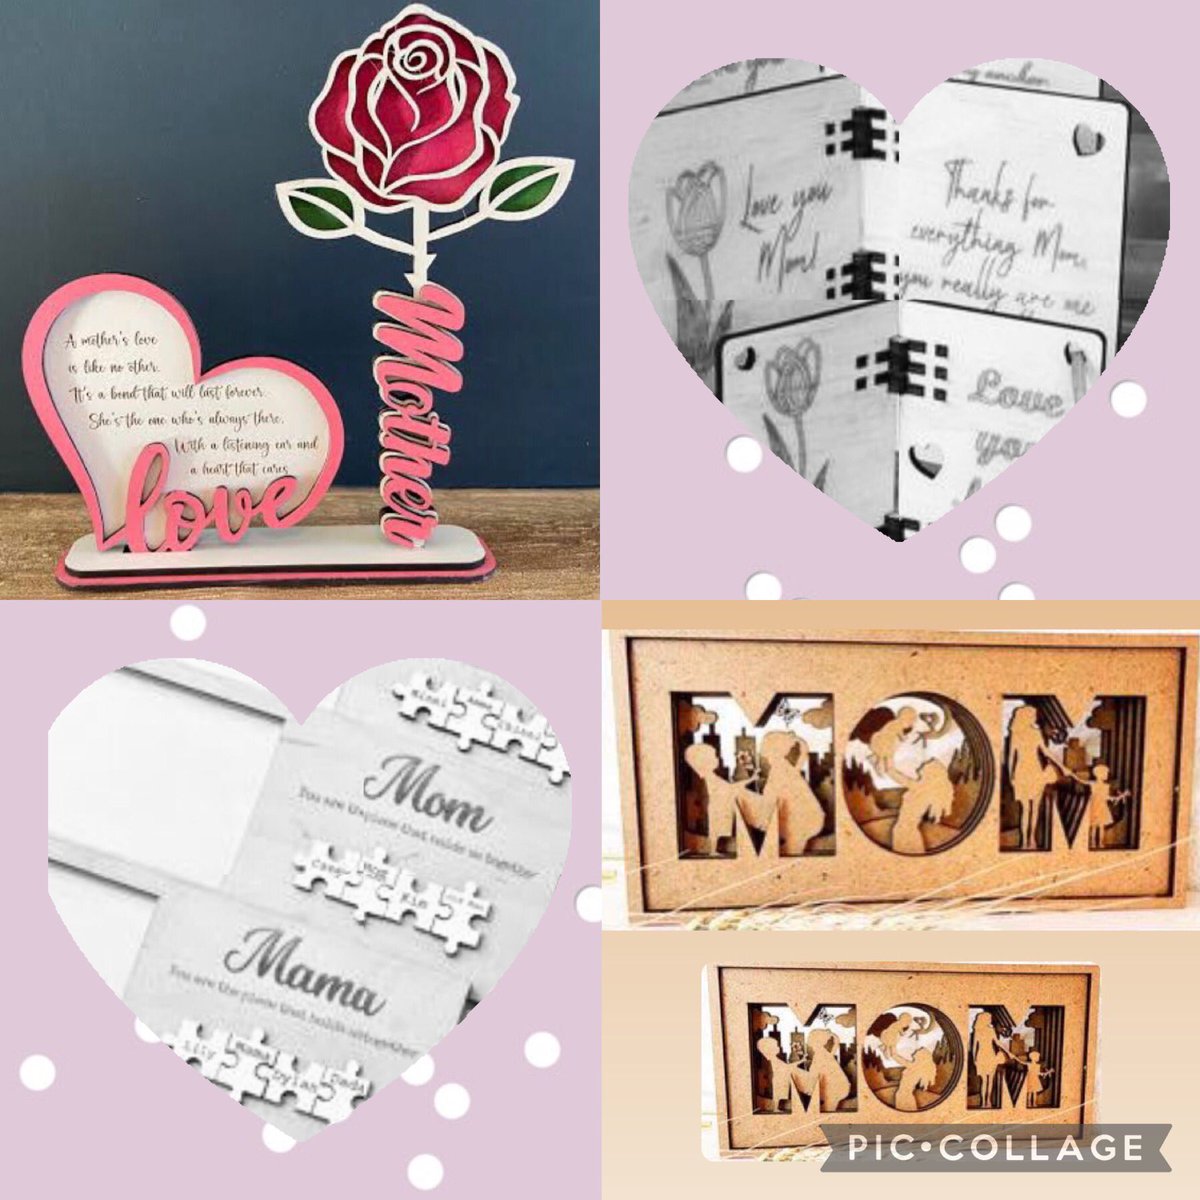 Orders online lee@l-e-e.co.za or by phone 083 406 1871.  Located in Pretoria, South Africa  #woodenengraving #giftideas #laserengraving #craftssouthafrica #crafts #craftideas #MothersDay #letsgetcrafty #mothersdaygift #entrepreneur #smallbusiness #mothersdaygiftideas